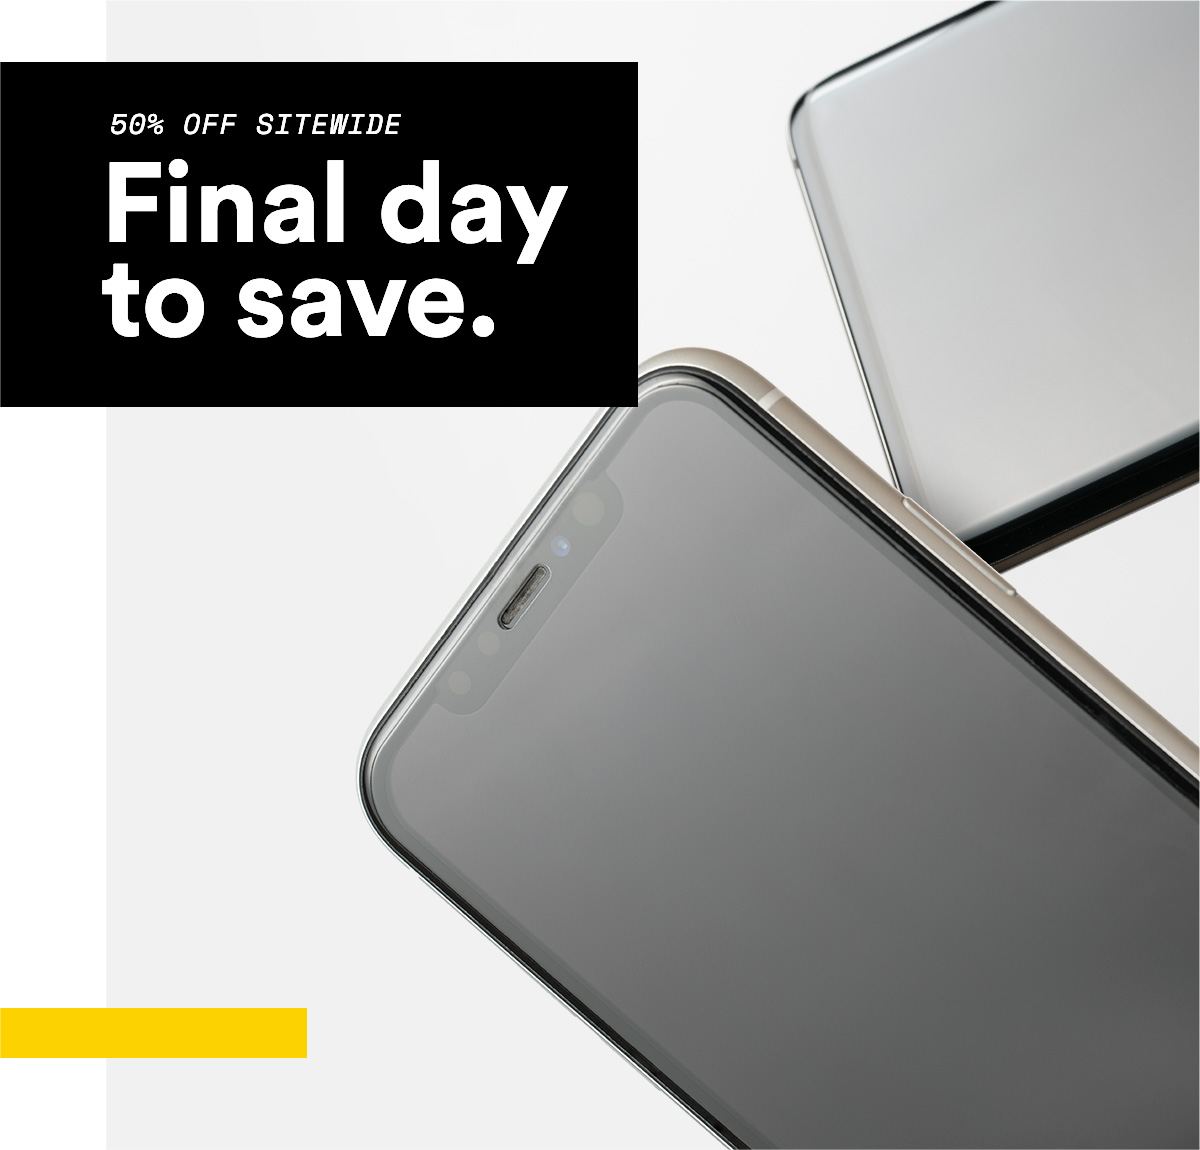 Final day to save.